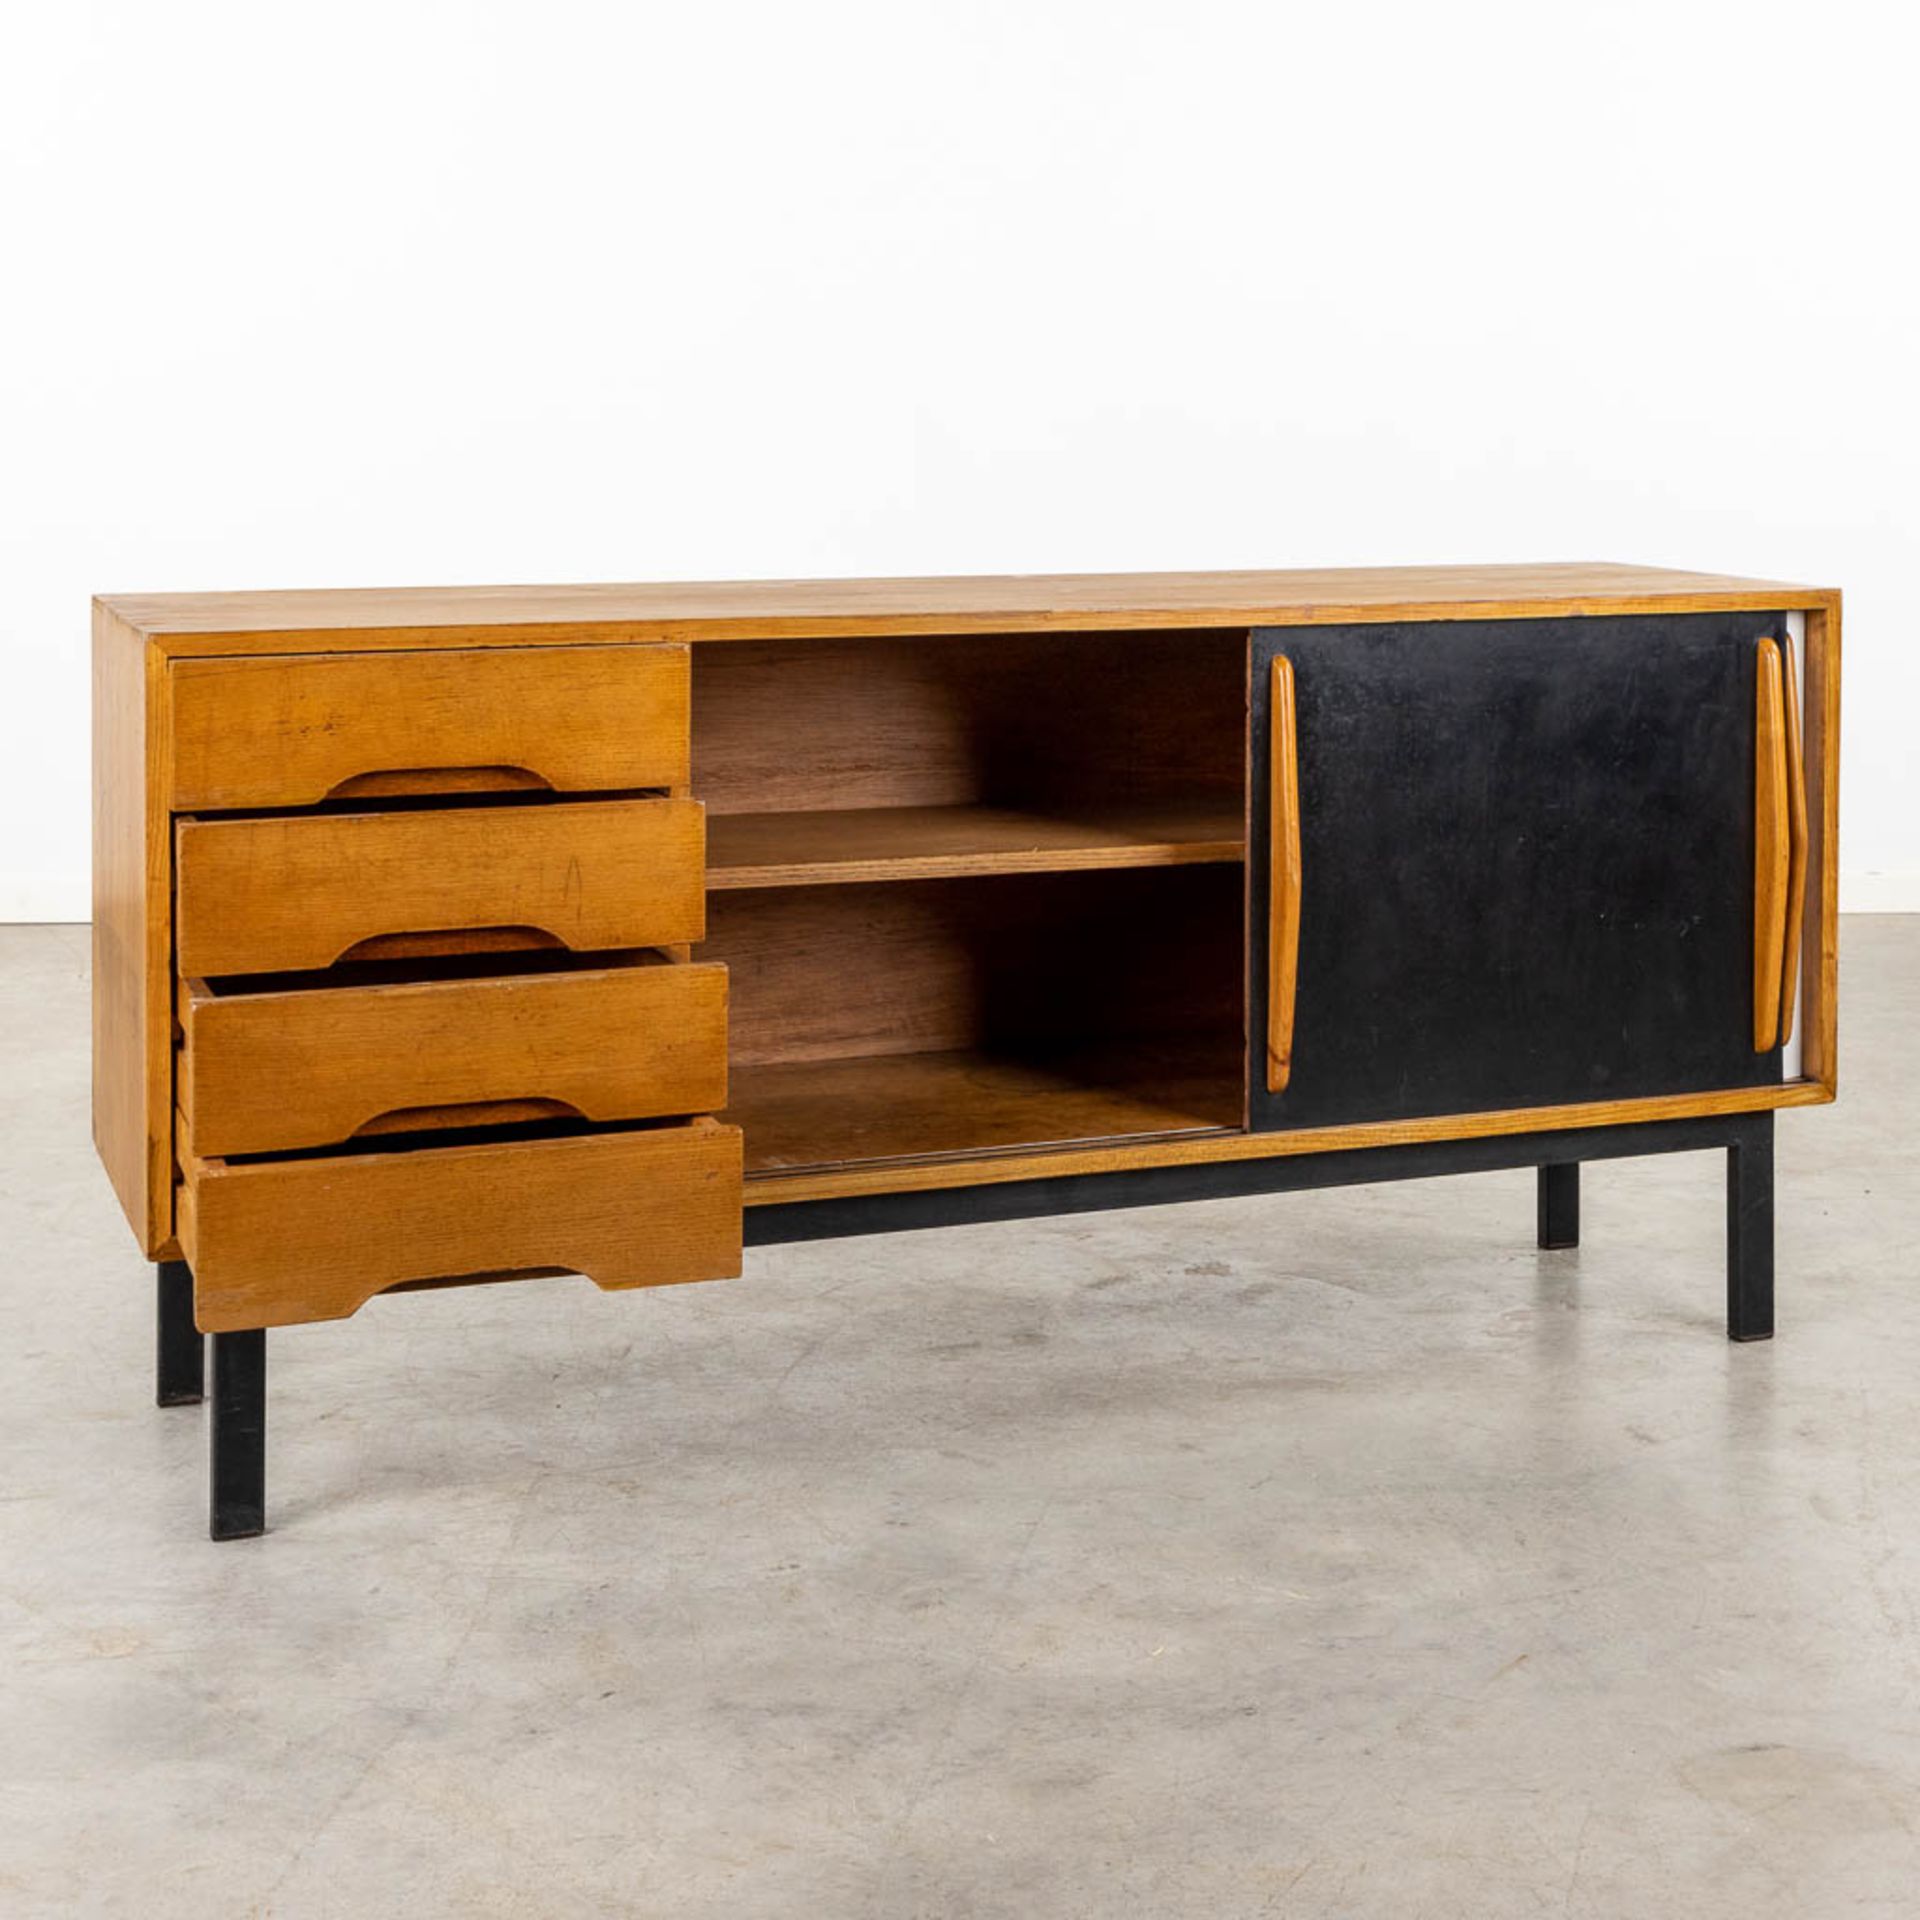 Charlotte PERRIAND (1903-1999) 'Cansado' a sideboard (D:47 x W:158 x H:73 cm) - Image 3 of 16